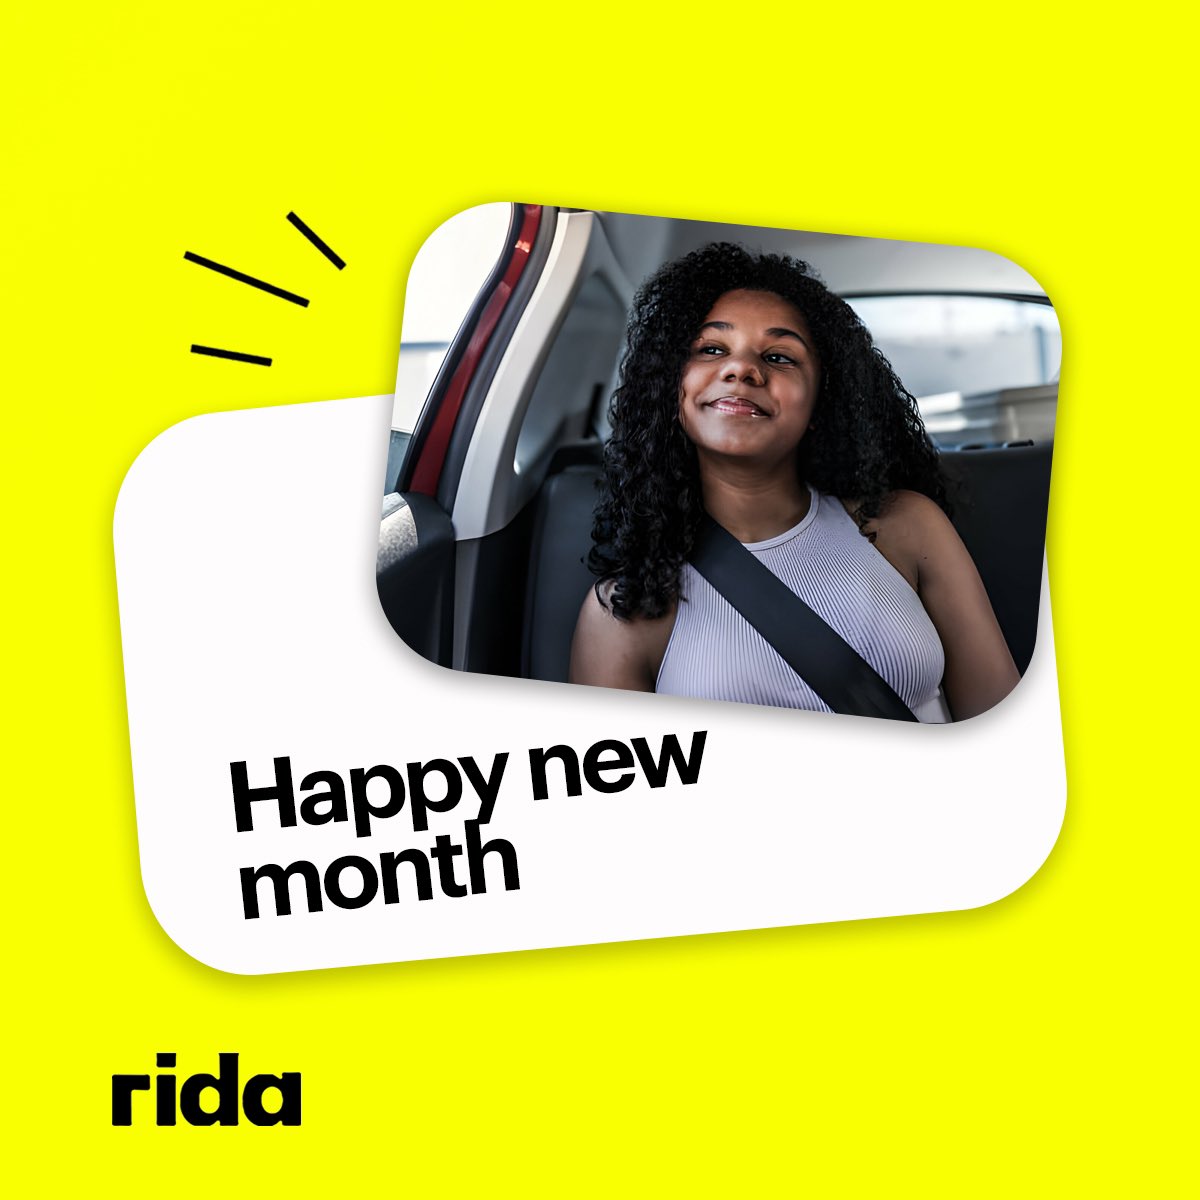 Let’s take you on your journey this February. Wishing you a month full of love from all of us at Rida and remember to book, negotiate and Keep moving with the guys wey sabi! More than a ride! 🚗 #RidaApp